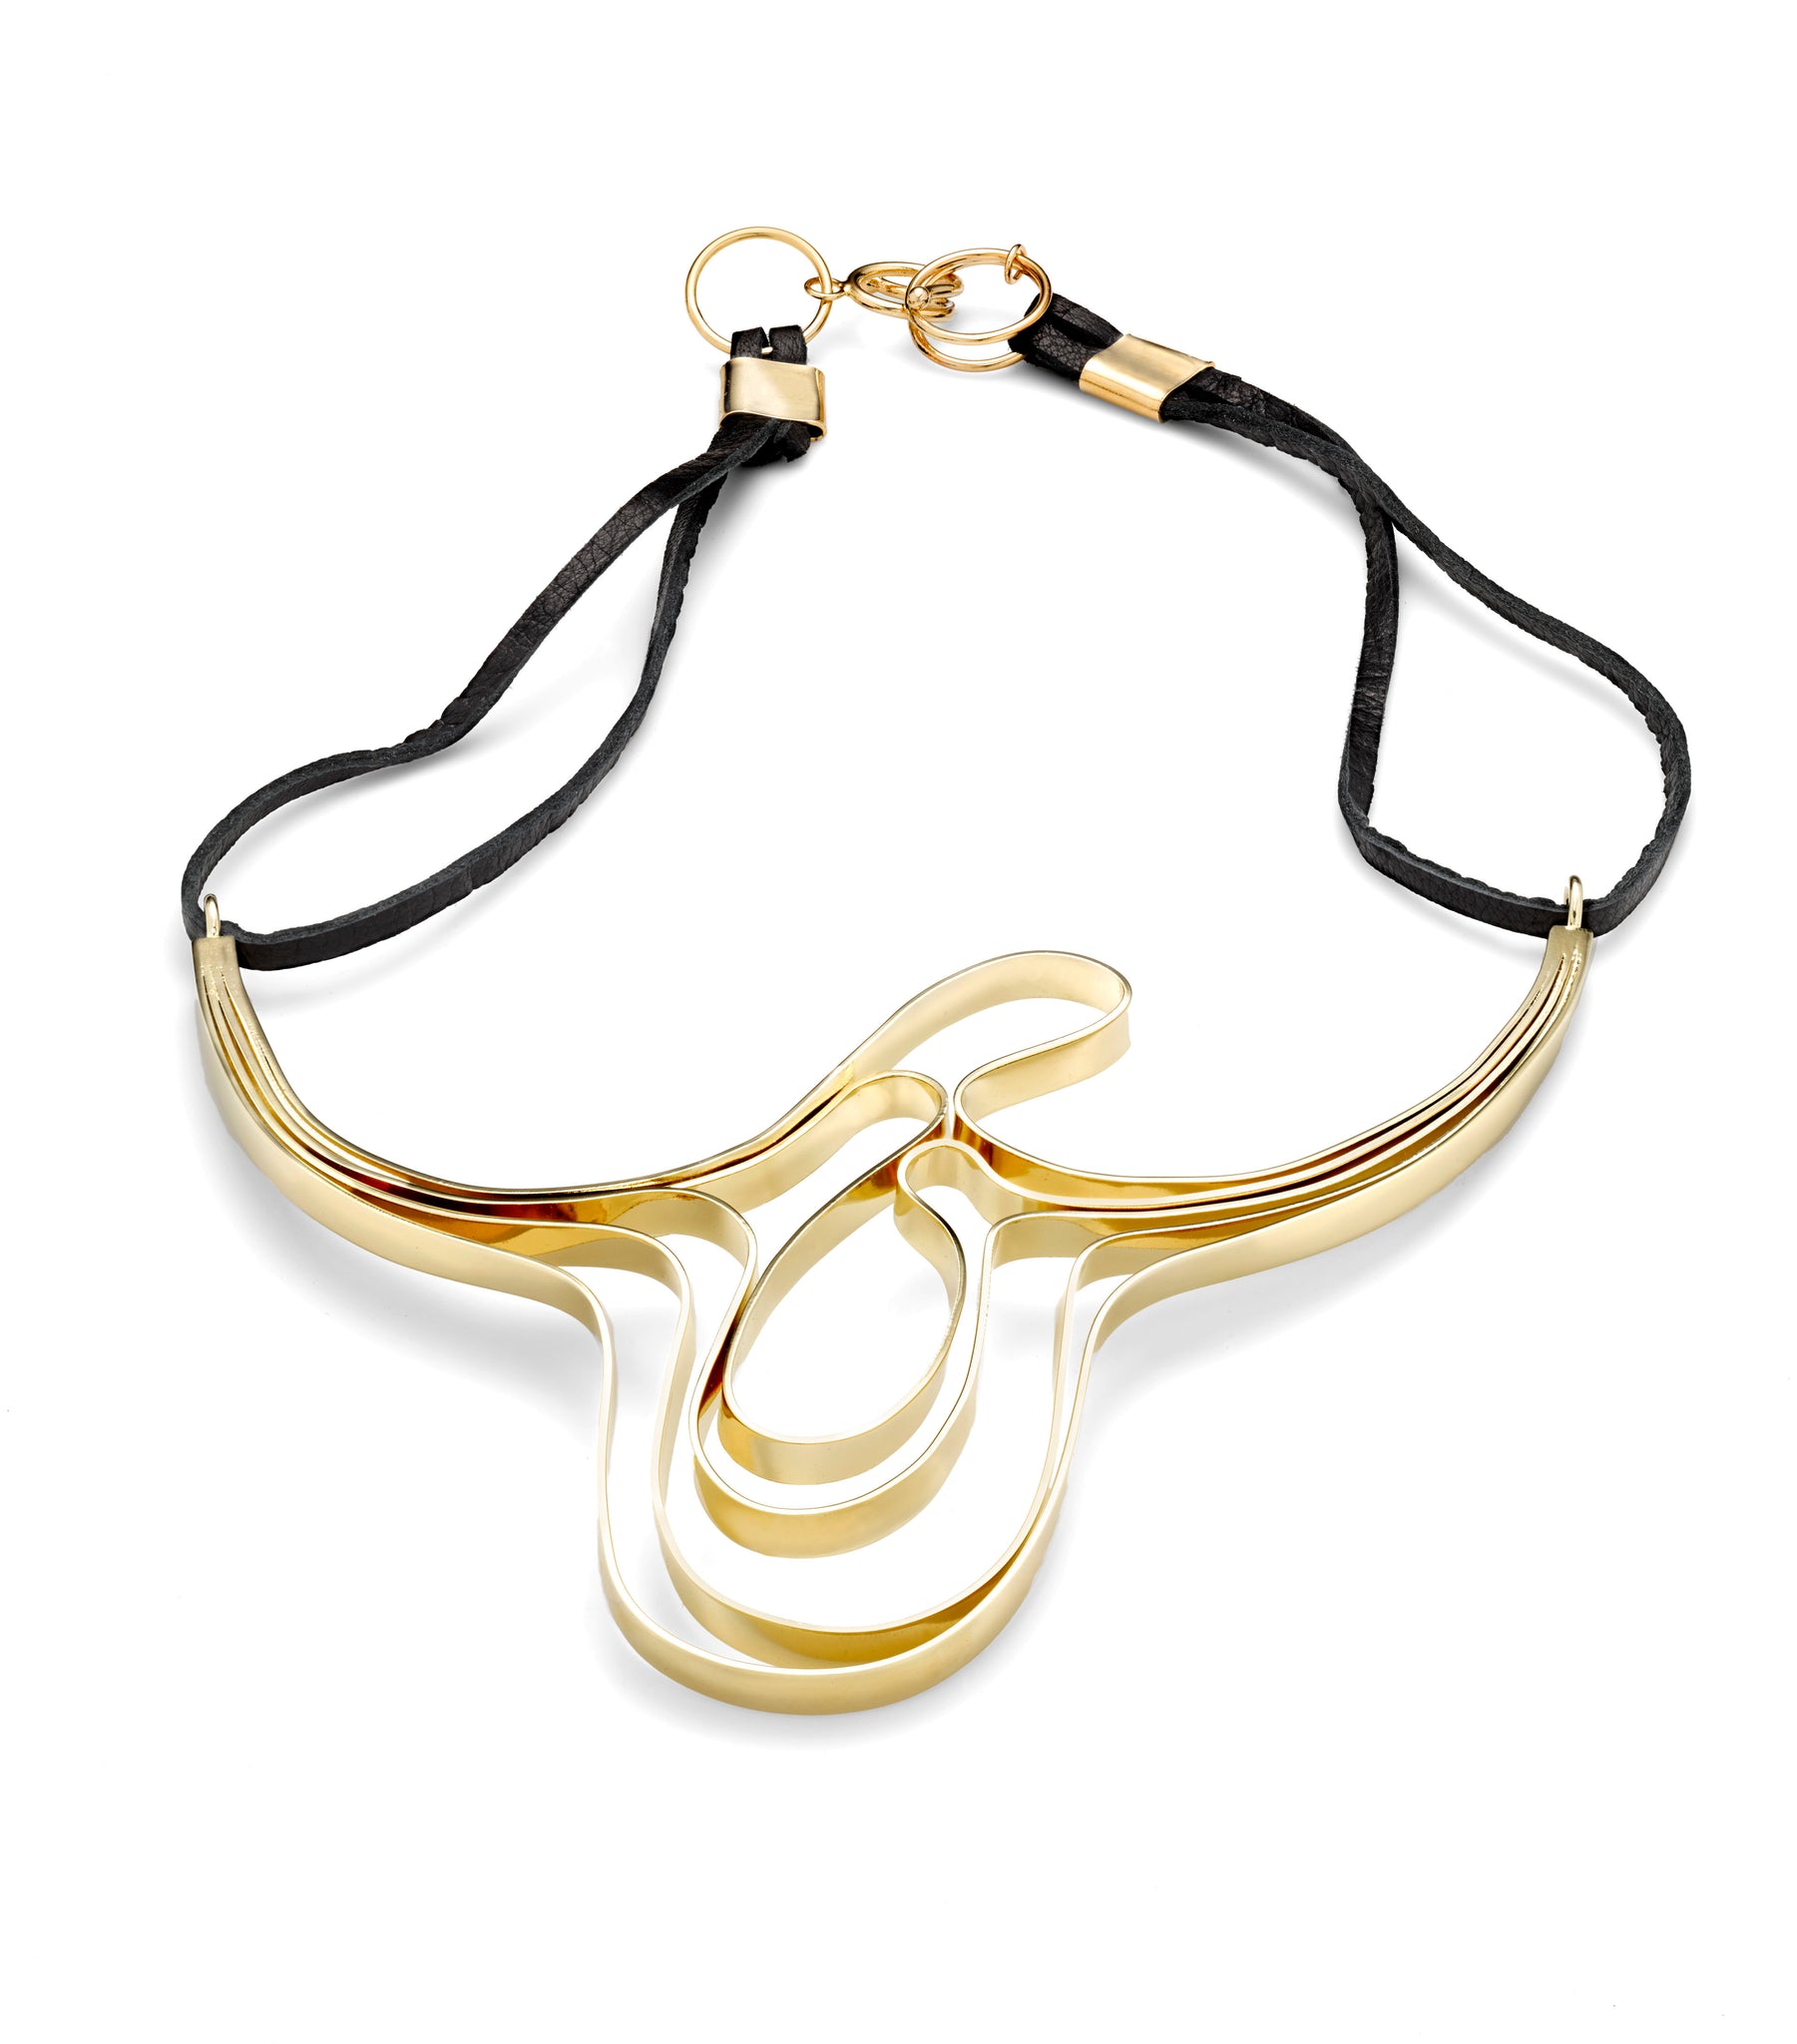 This necklace sits beautifully on the chest and because of the sculptural nature of that top curve it makes the viewer drawn to the wearer's face. It is a very complimentary piece that sits right below the collar bone.  Approximately 4" by 4", finished with soft genuine leather and proprietary Oblik Atelier hook closures.  It is hand formed in brass and finished in 14k nickel free gold plate.